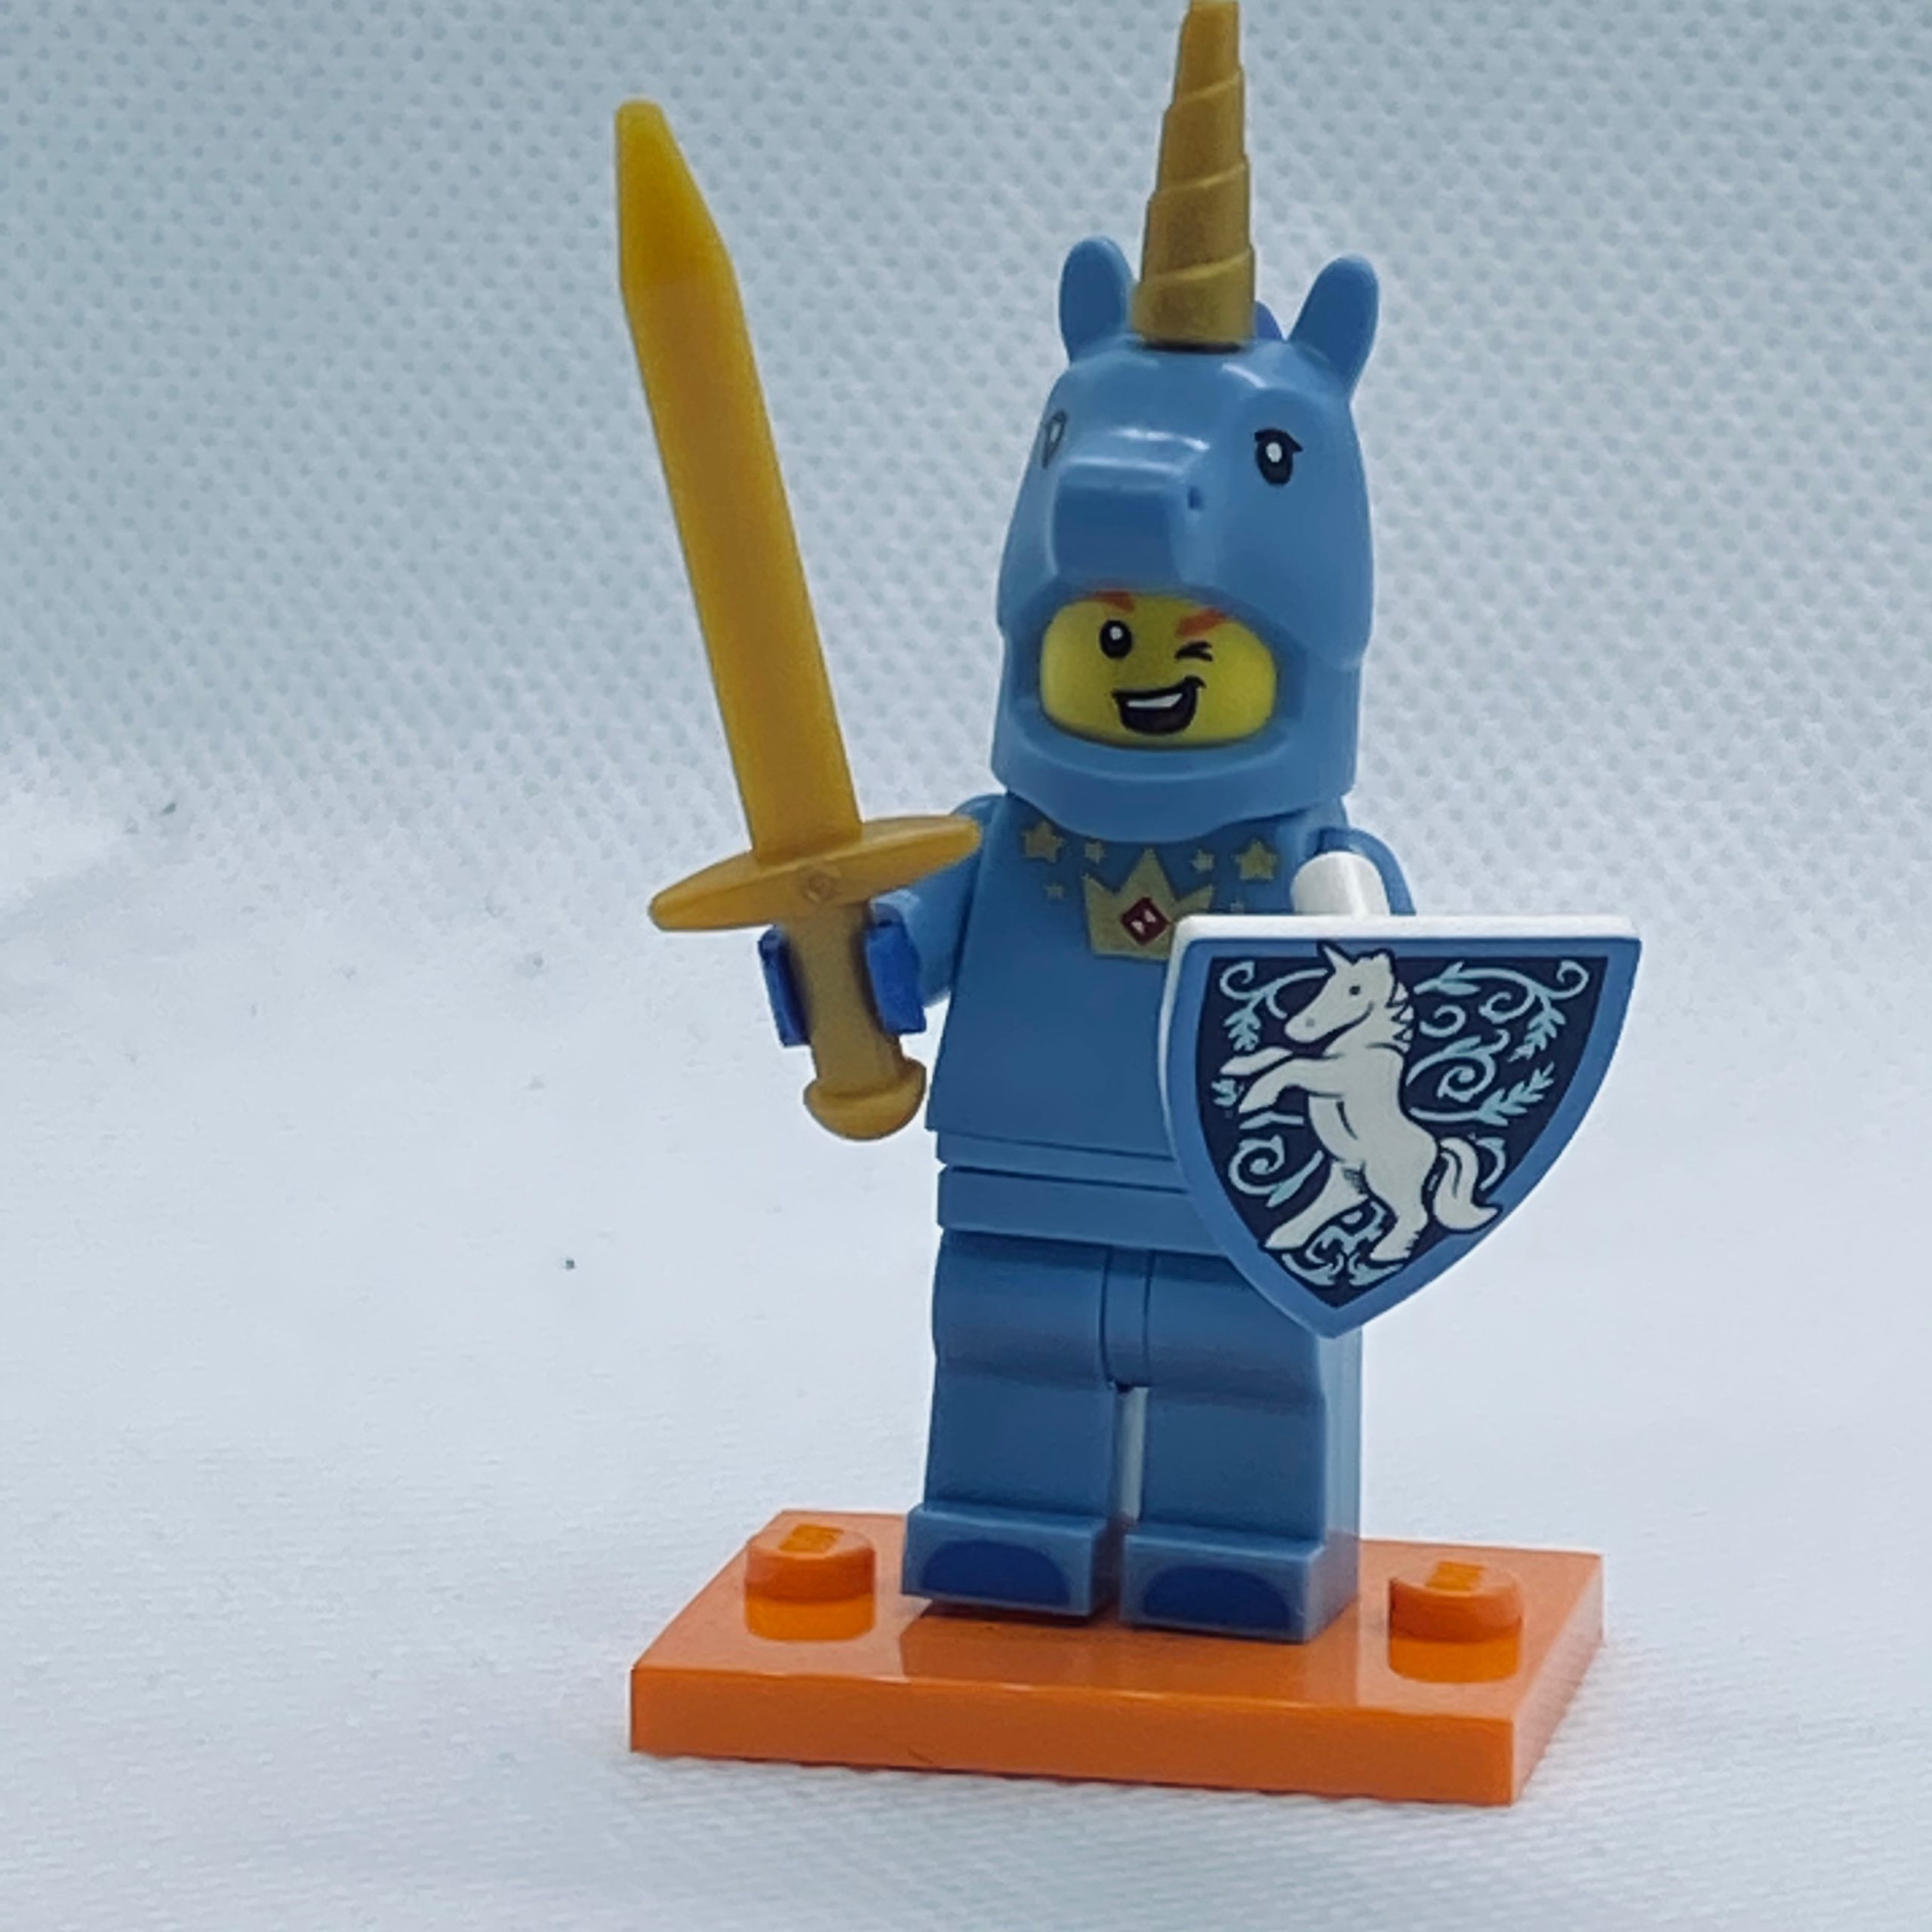 collectibles New lego unicorn guy series 18 from set 71021 col18-17